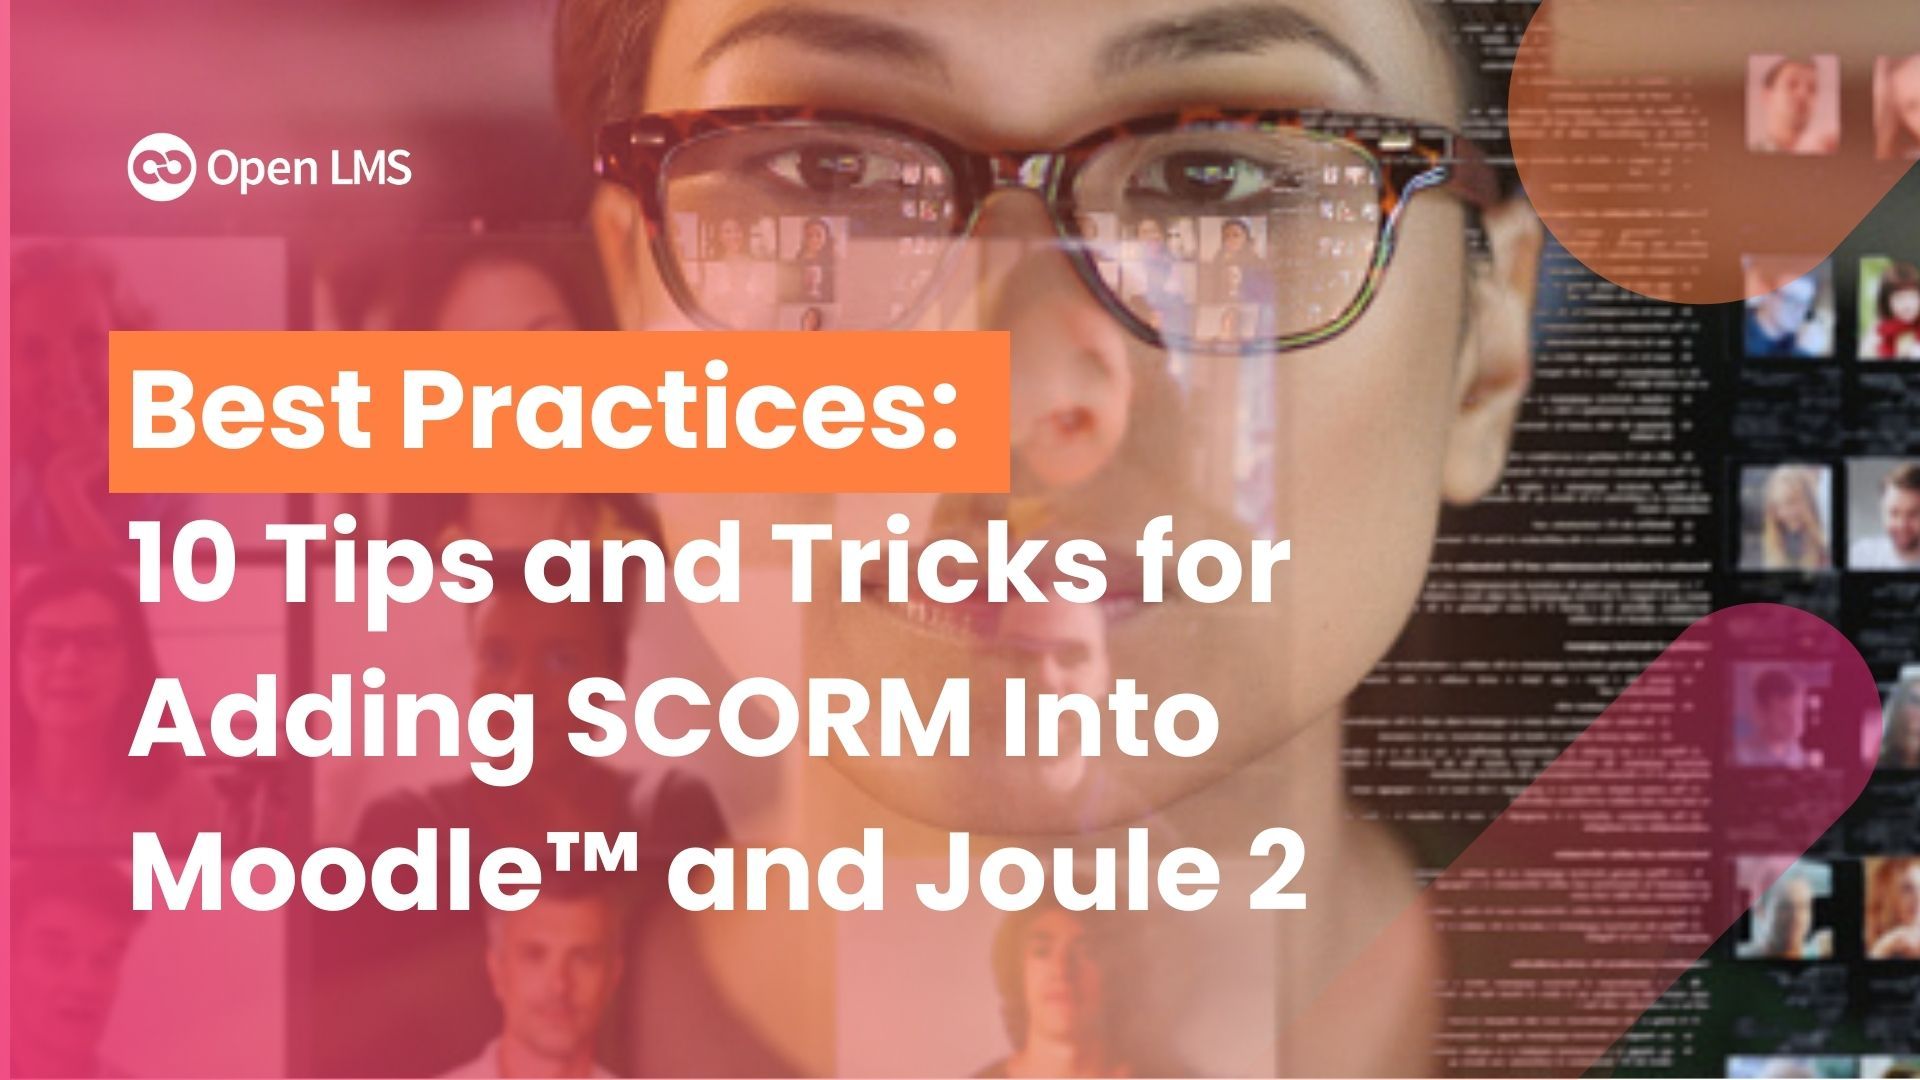 Best practices: 10 tips and tricks for adding SCORM into Moodle™ and Joule 2